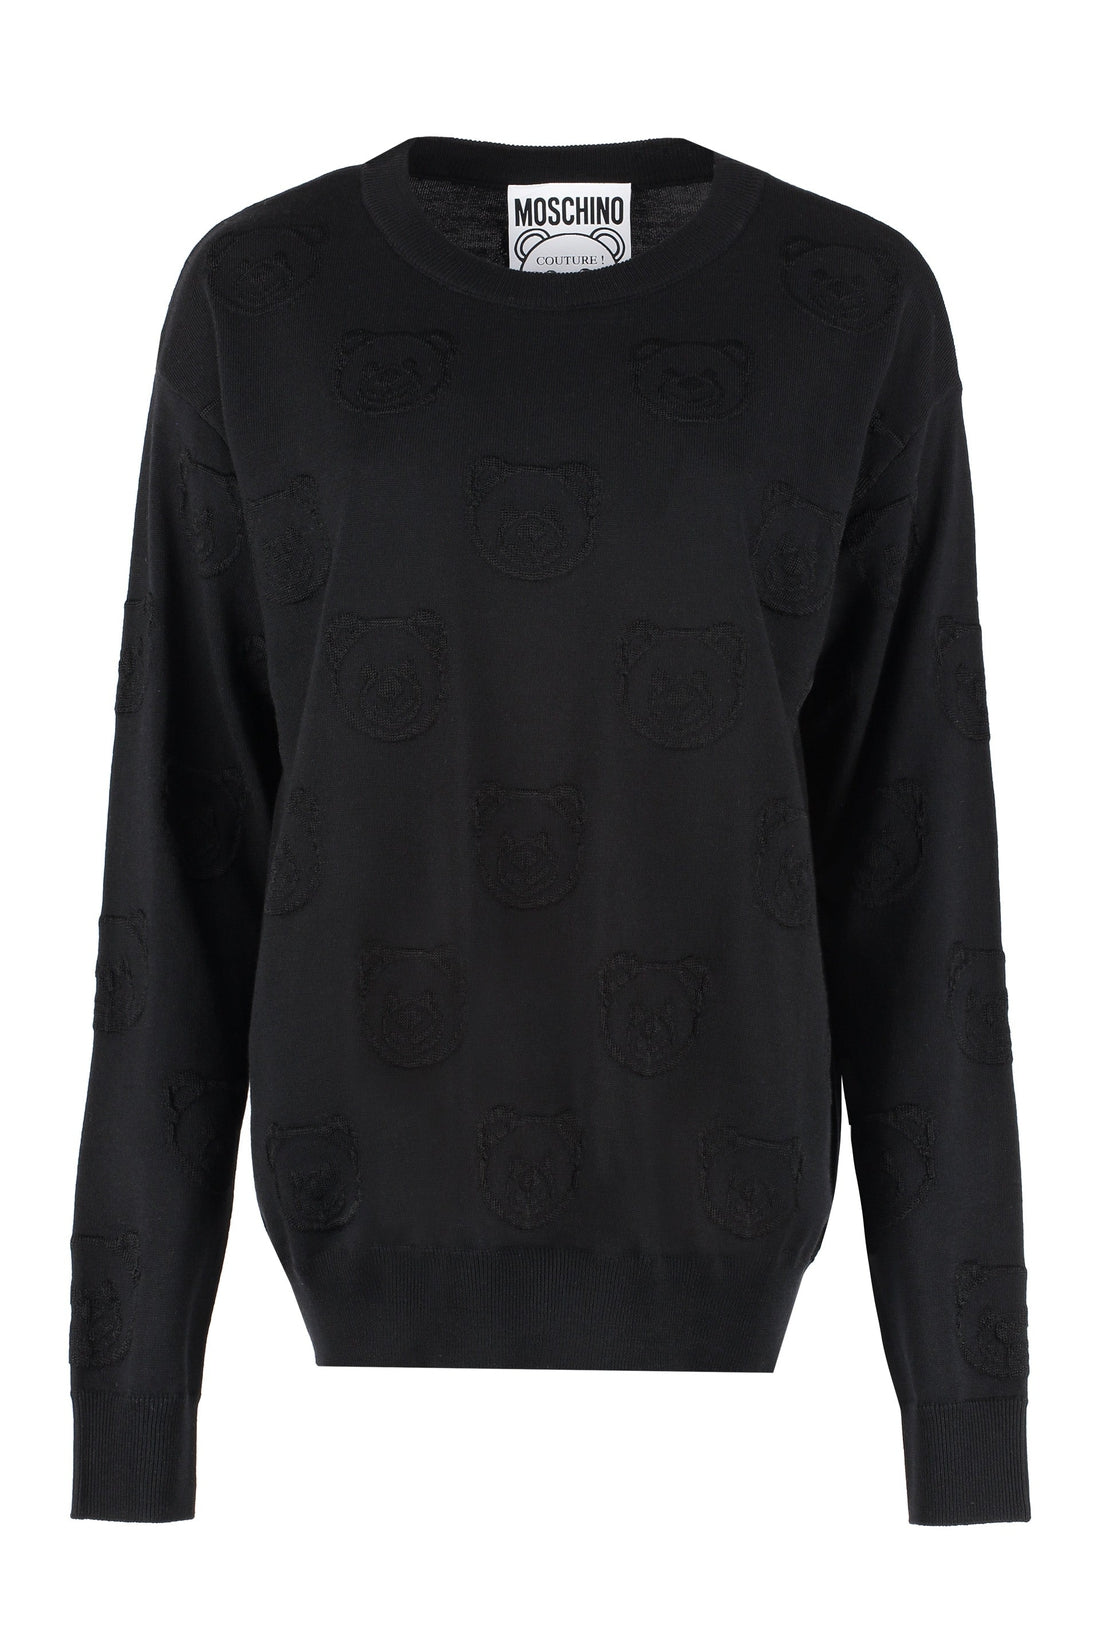 Moschino-OUTLET-SALE-Virgin wool sweater-ARCHIVIST